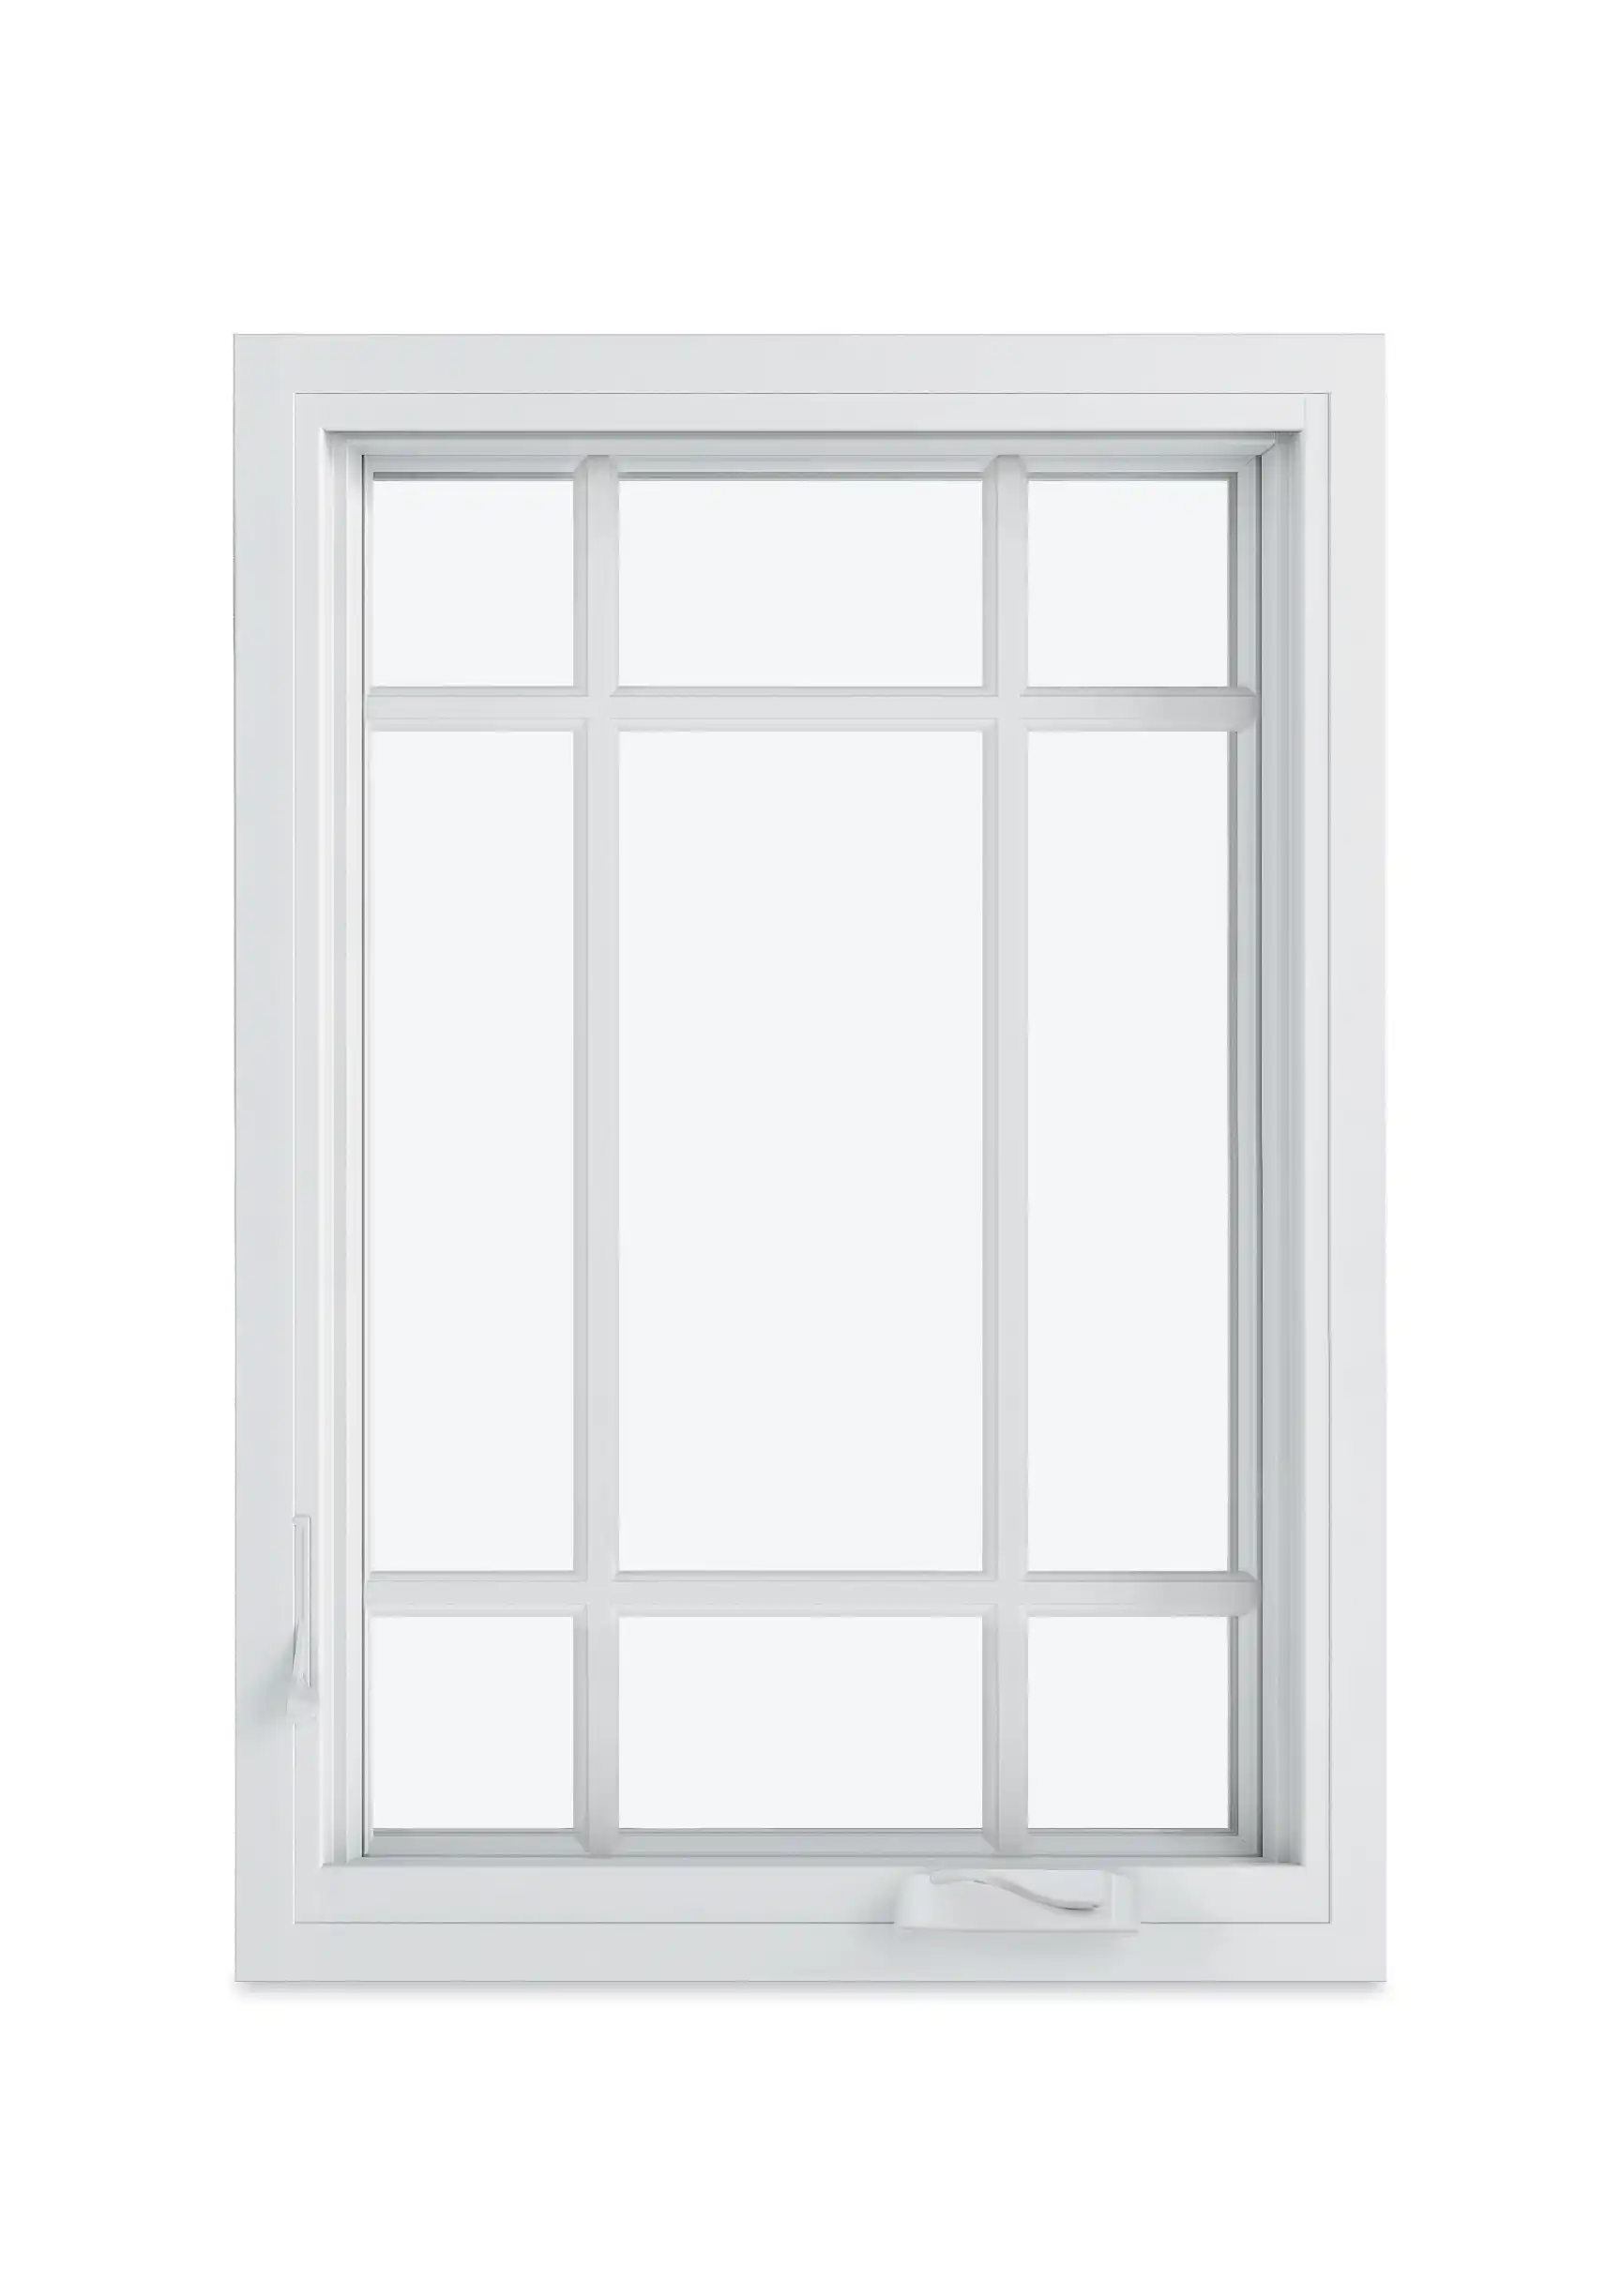 A white Marvin Replacement Casement window with a prairie nine lite style.